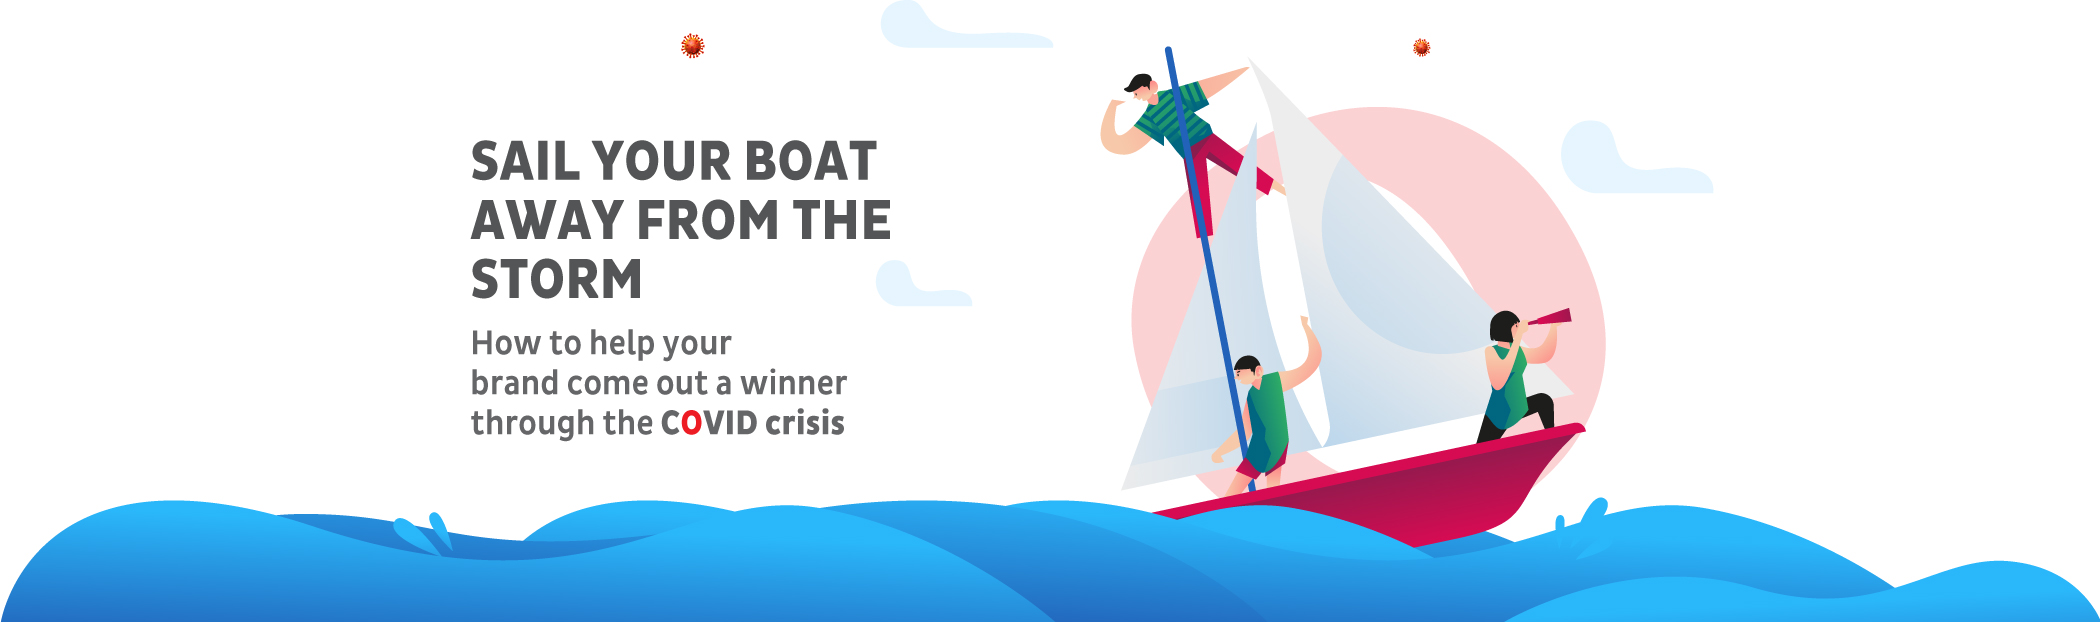 Sail your boat away from the storm: How to help your brand come out a winner through the COVID crisis